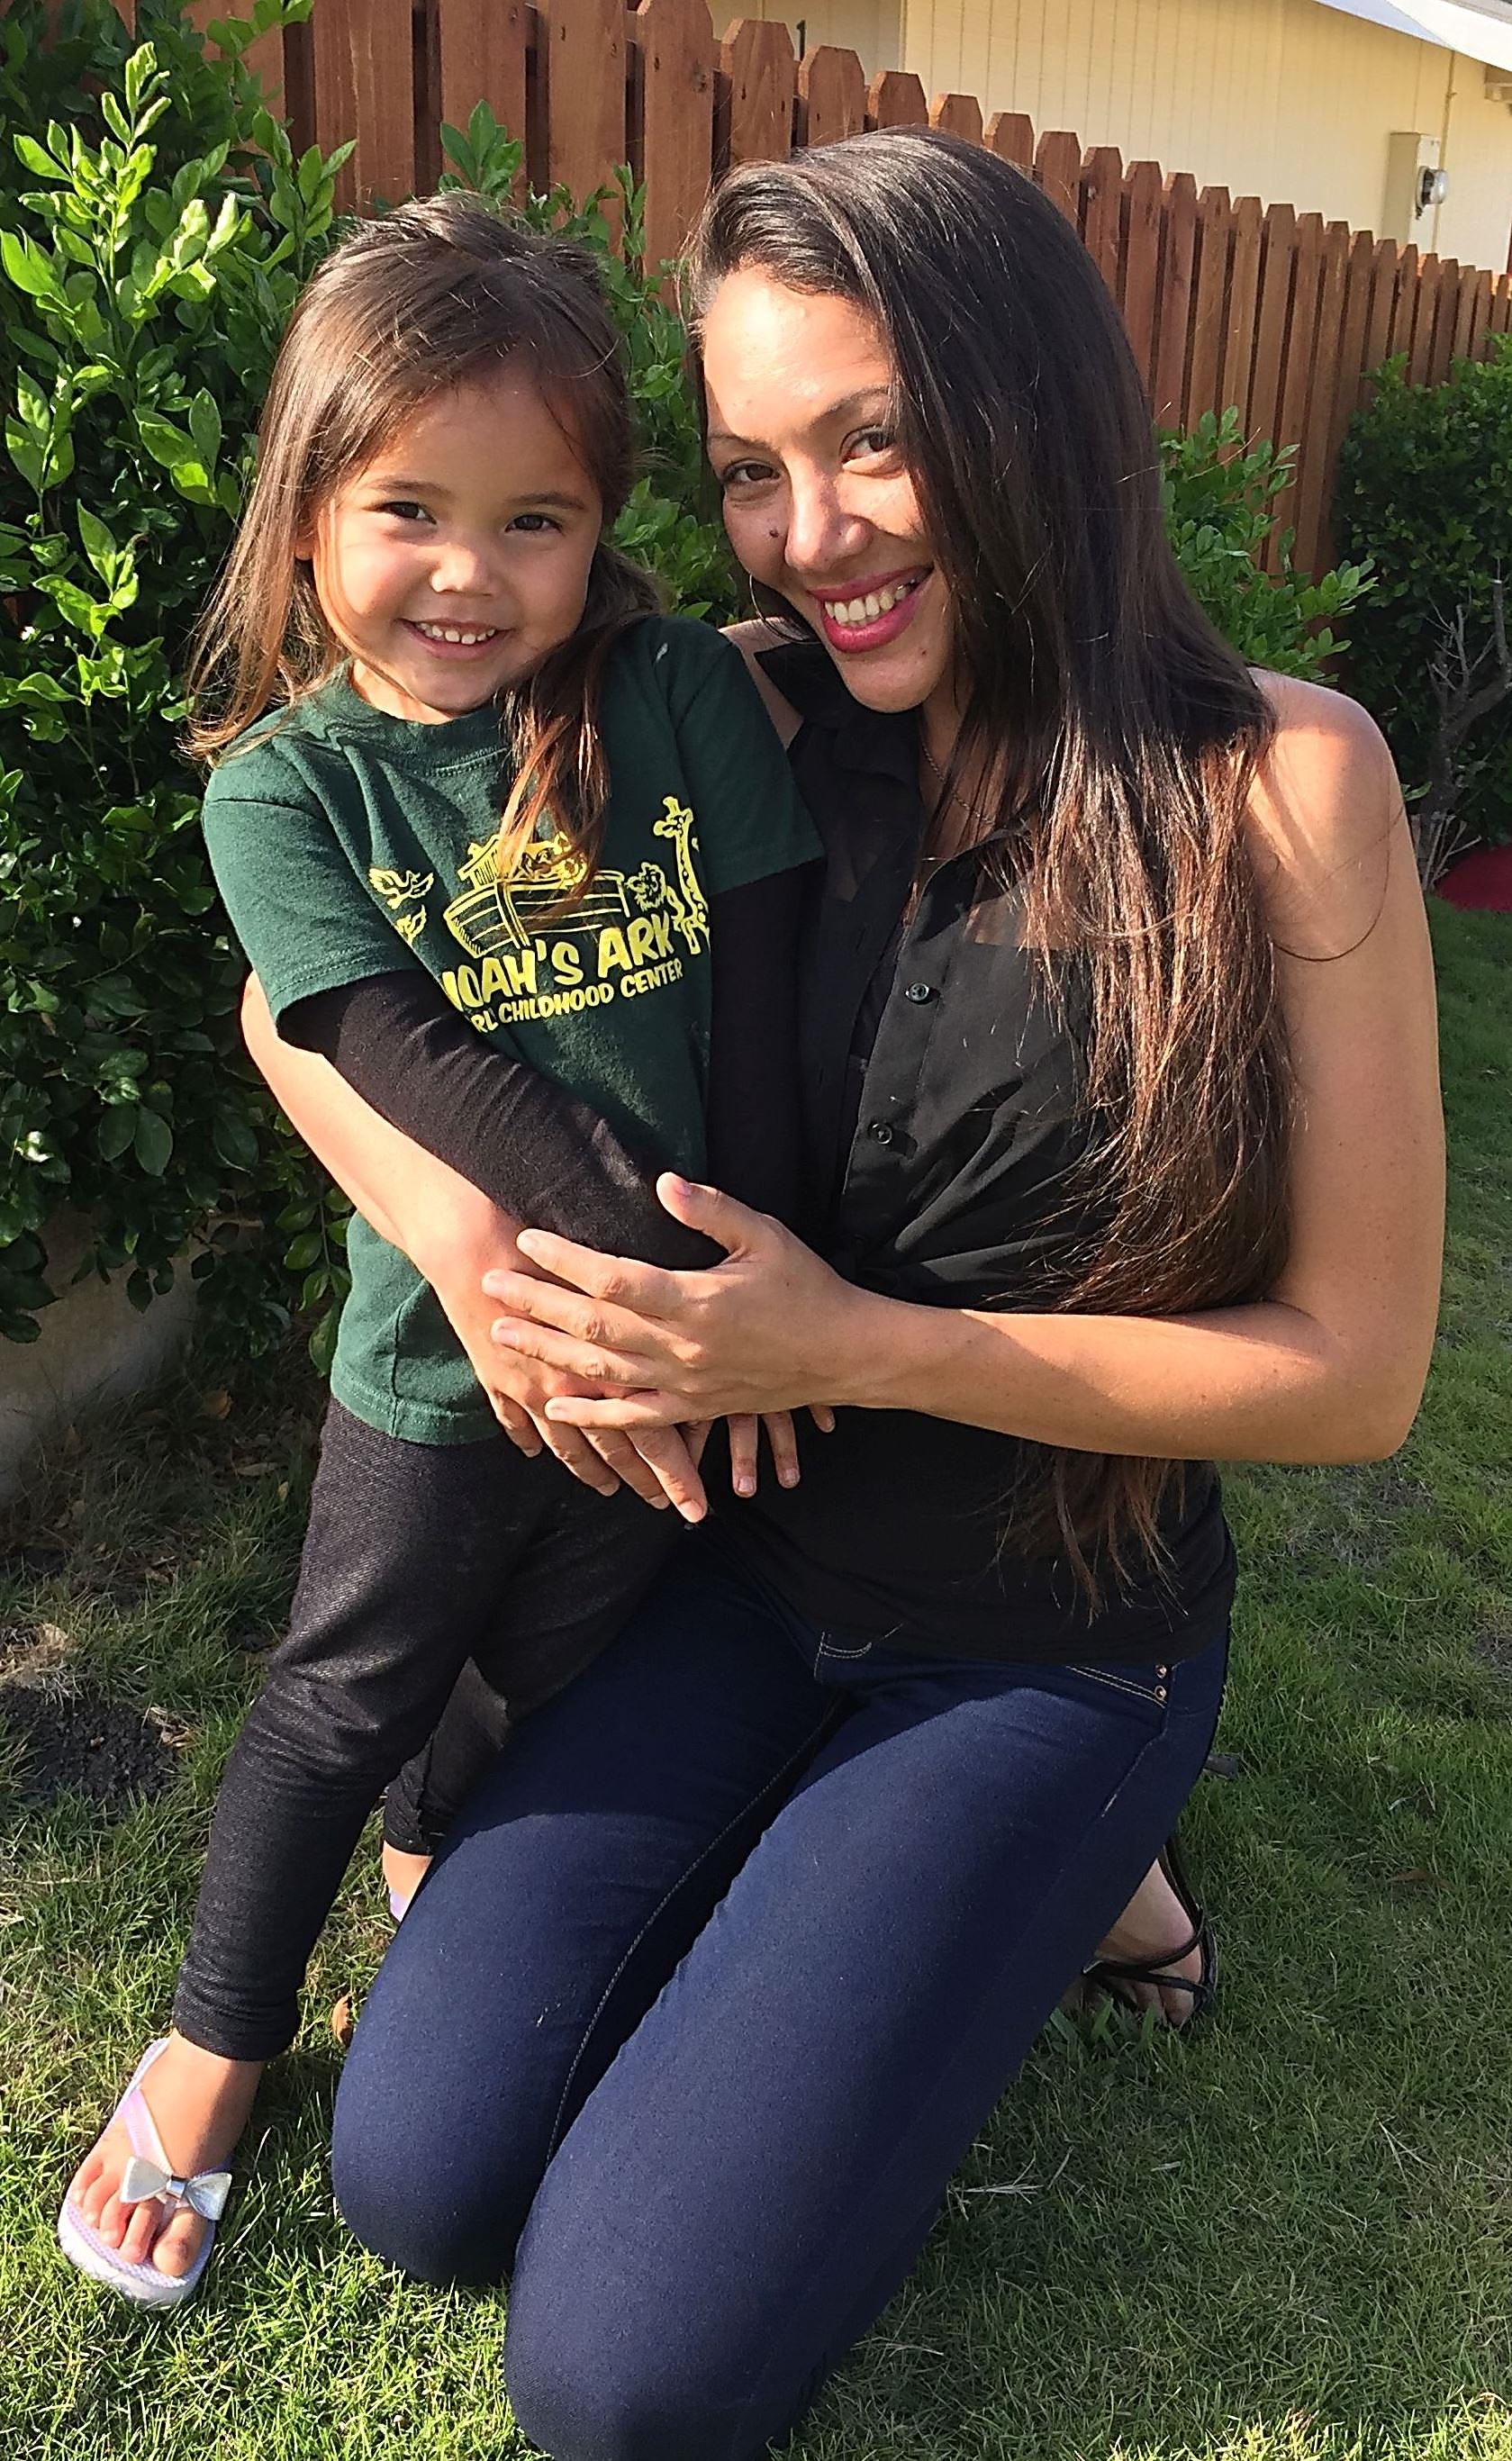 "Spring and Gia Maile Taylor" -- A former Malama client and her young daughter, Gia Maile, who stayed with Spring when she lived at Malama while receiving treatment last year. Courtesy photo.